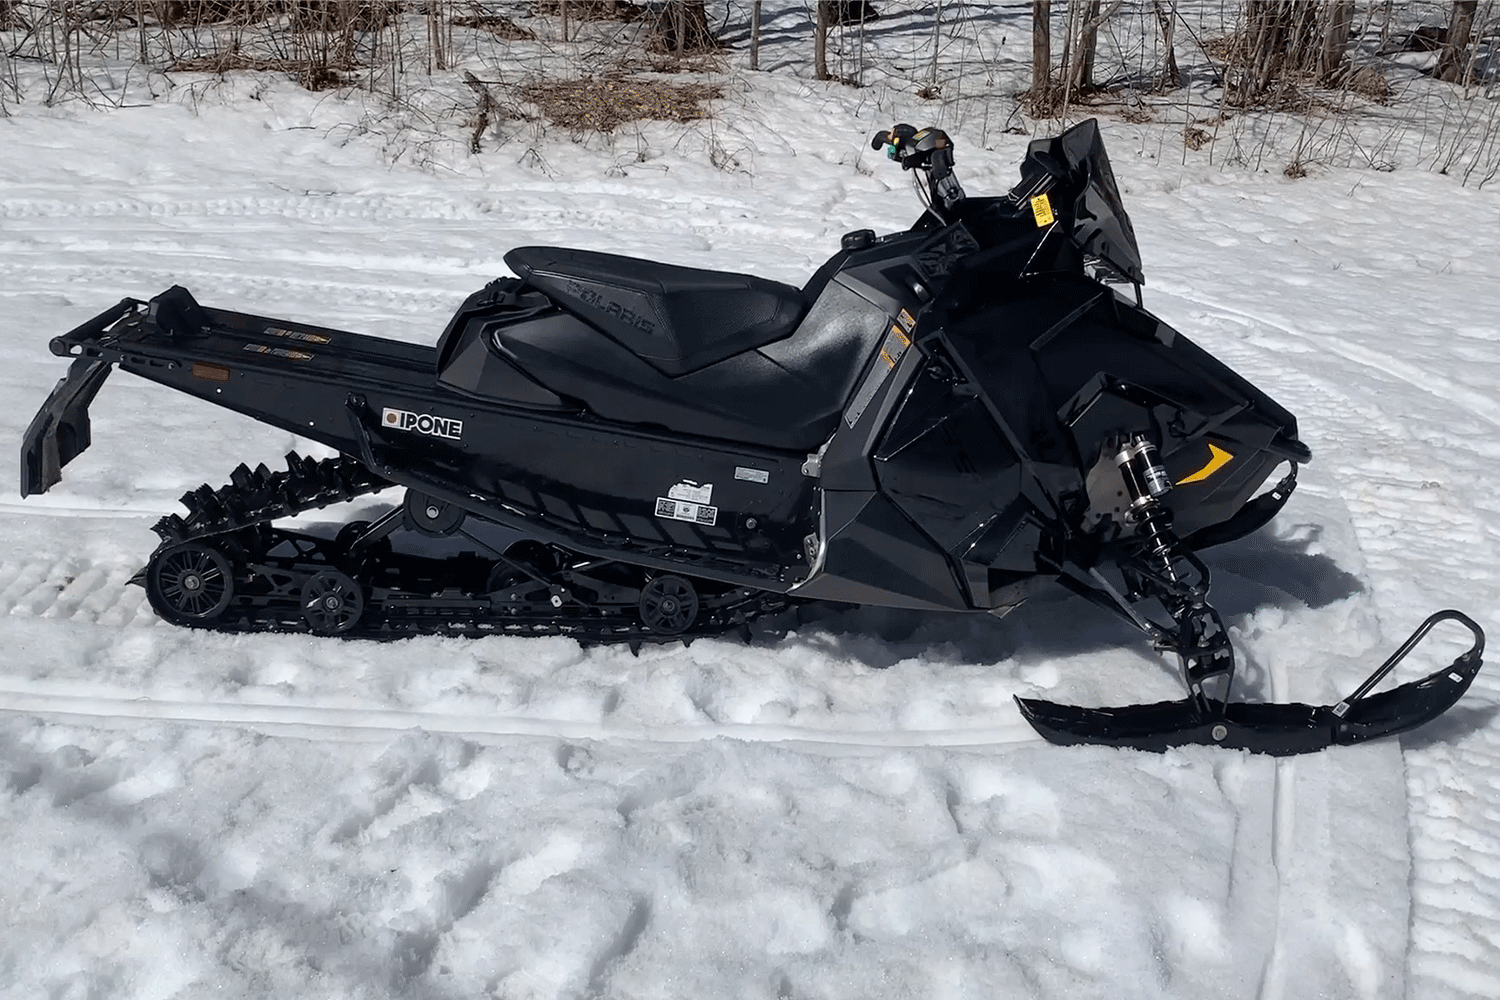 Highs and Lows of the 2019 Polaris 850 Switchback Assault Supertrax